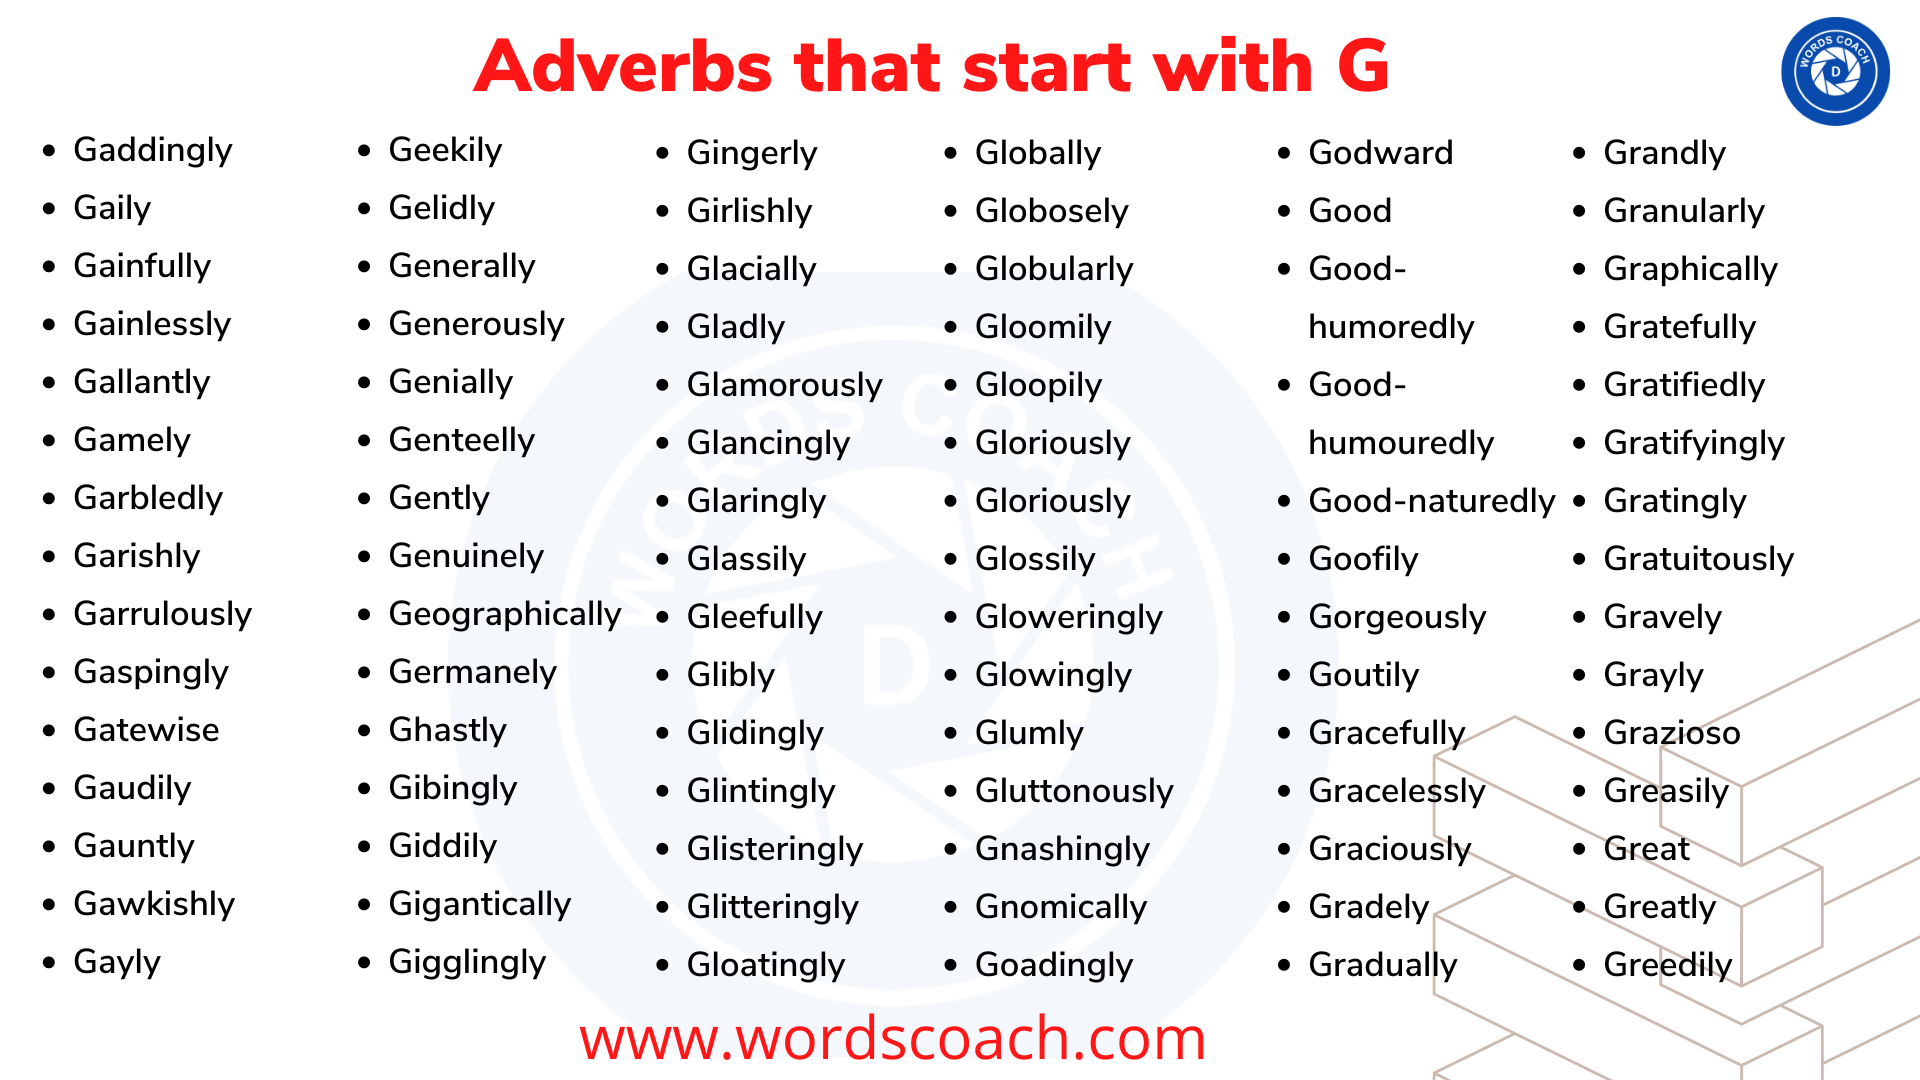 Adverbs that start with G - wordscoach.com